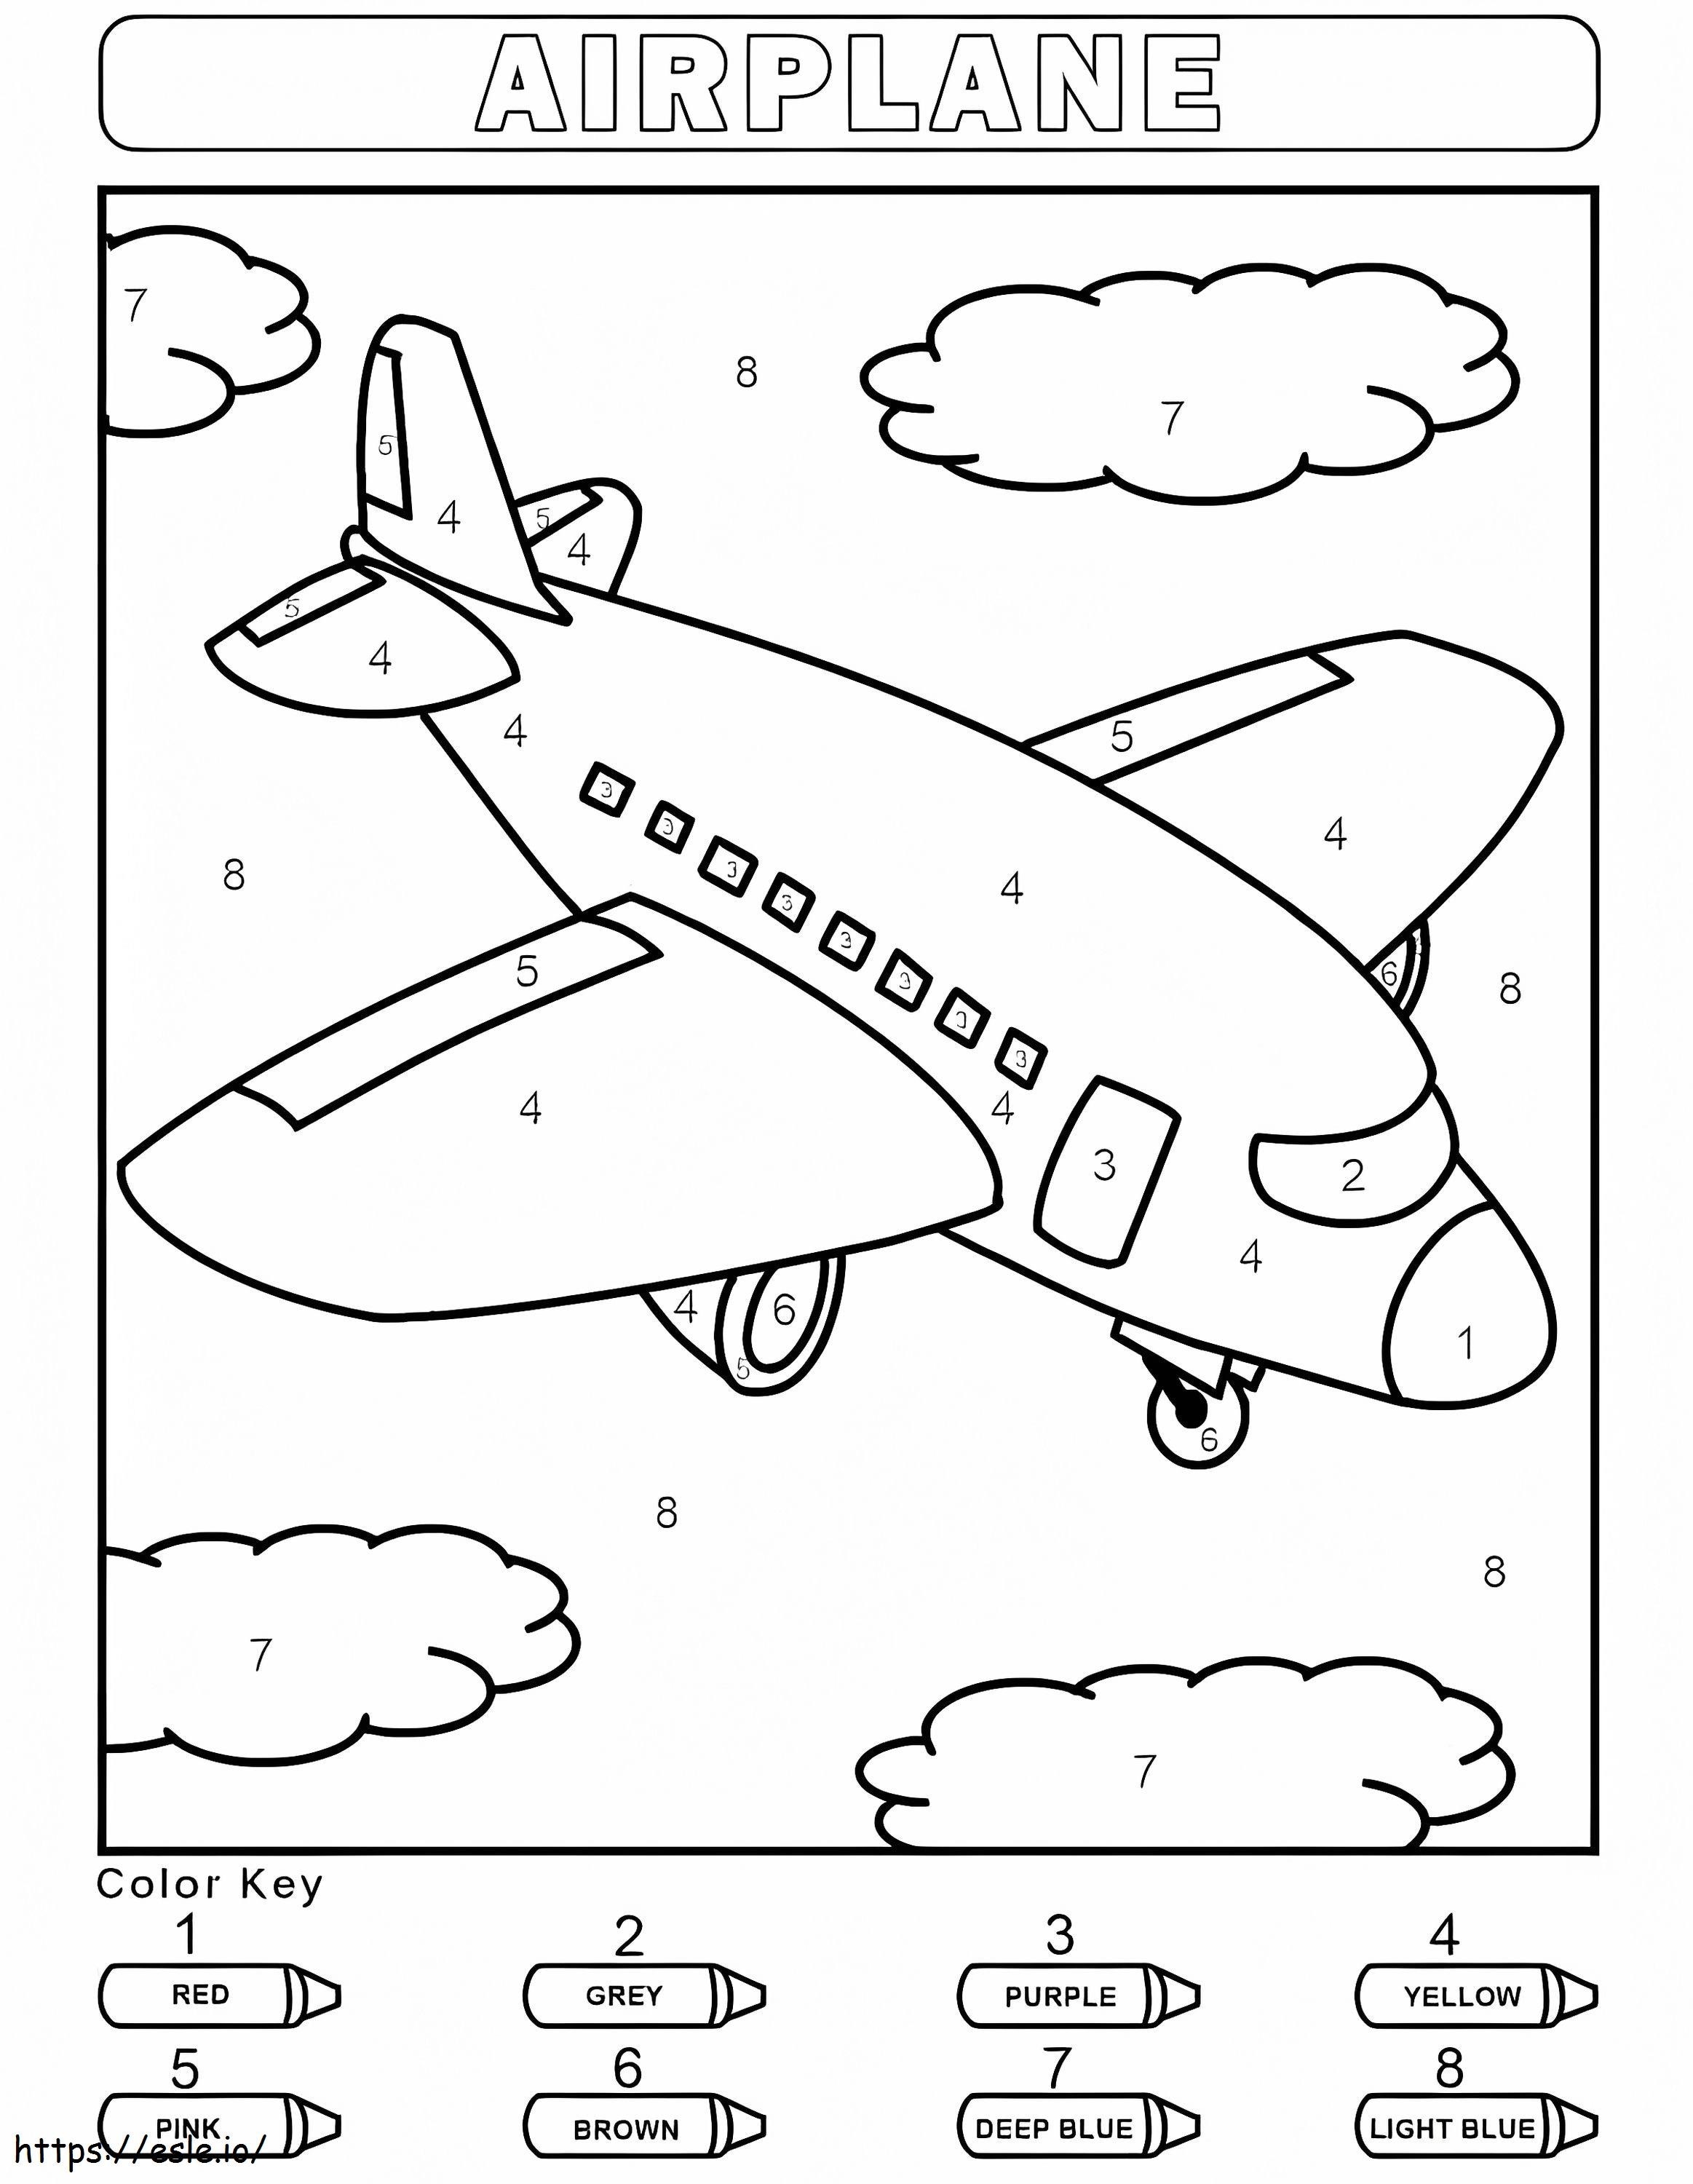 Airplane For Kindergarten Color By Number coloring page